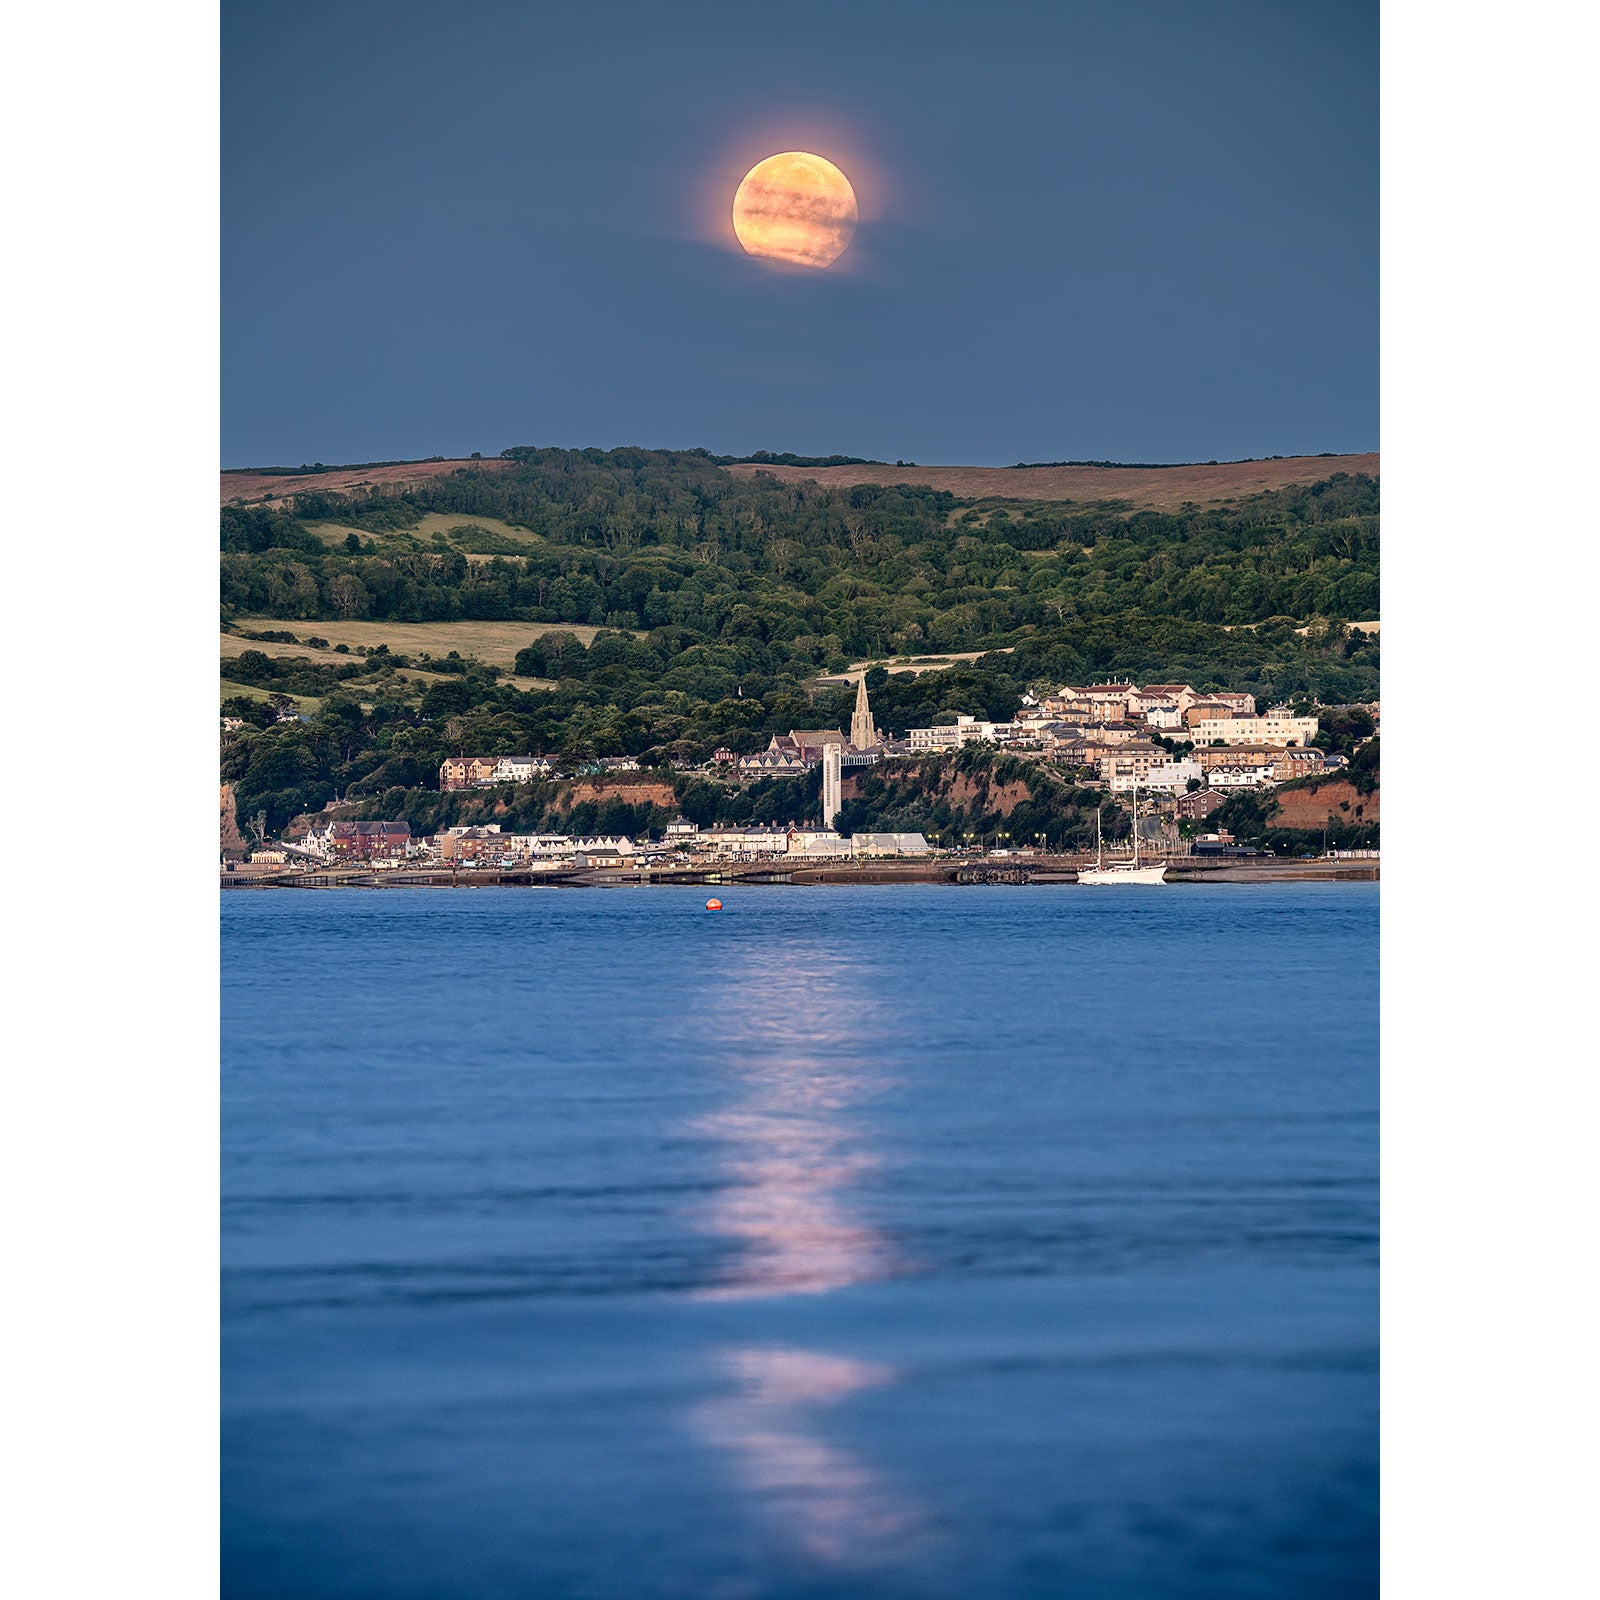 A large Moonset over Shanklin rising above a coastal town on the Isle of Wight, with its reflection on the water's surface captured by Available Light Photography.